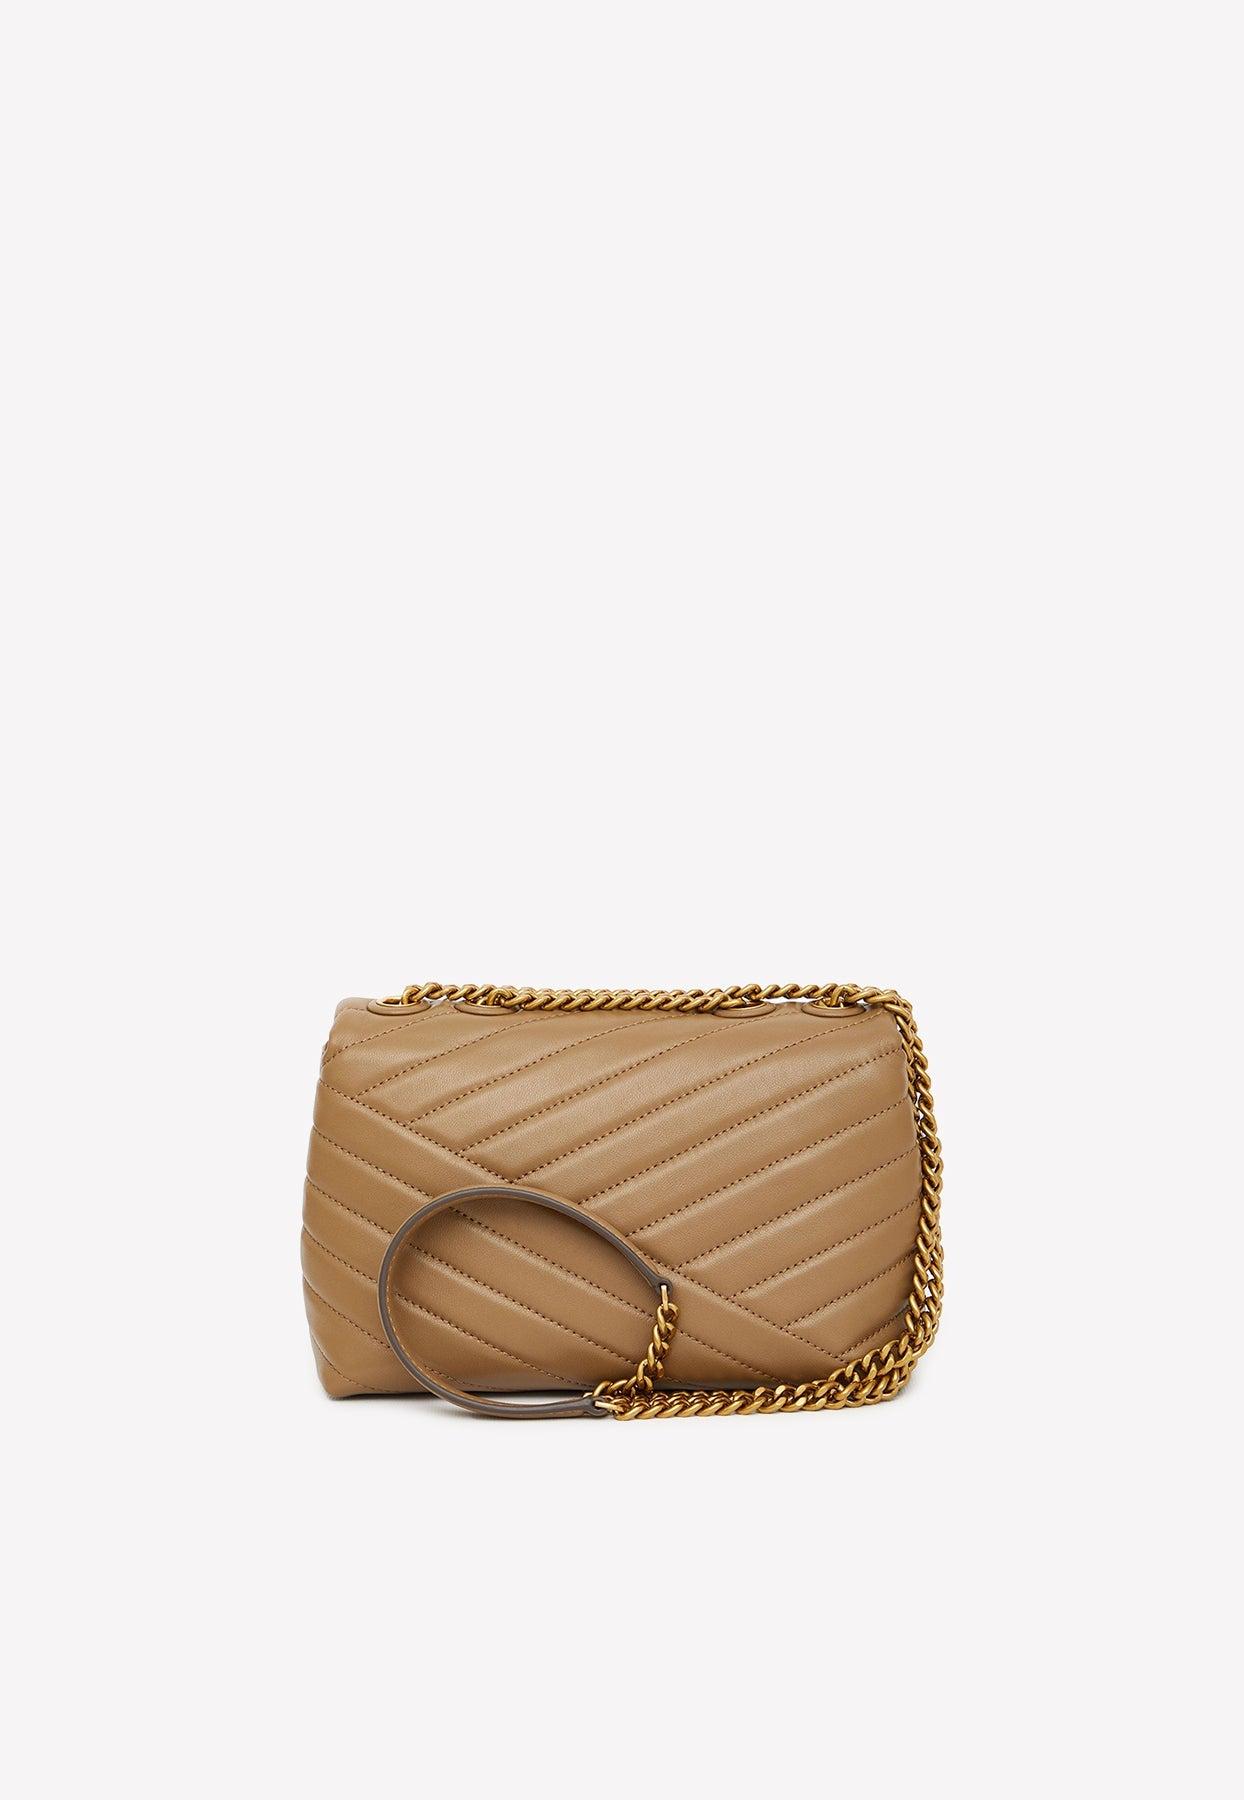 Tory Burch Small Kira Chevron Quilted Leather Crossbody Bags in Brown | Lyst